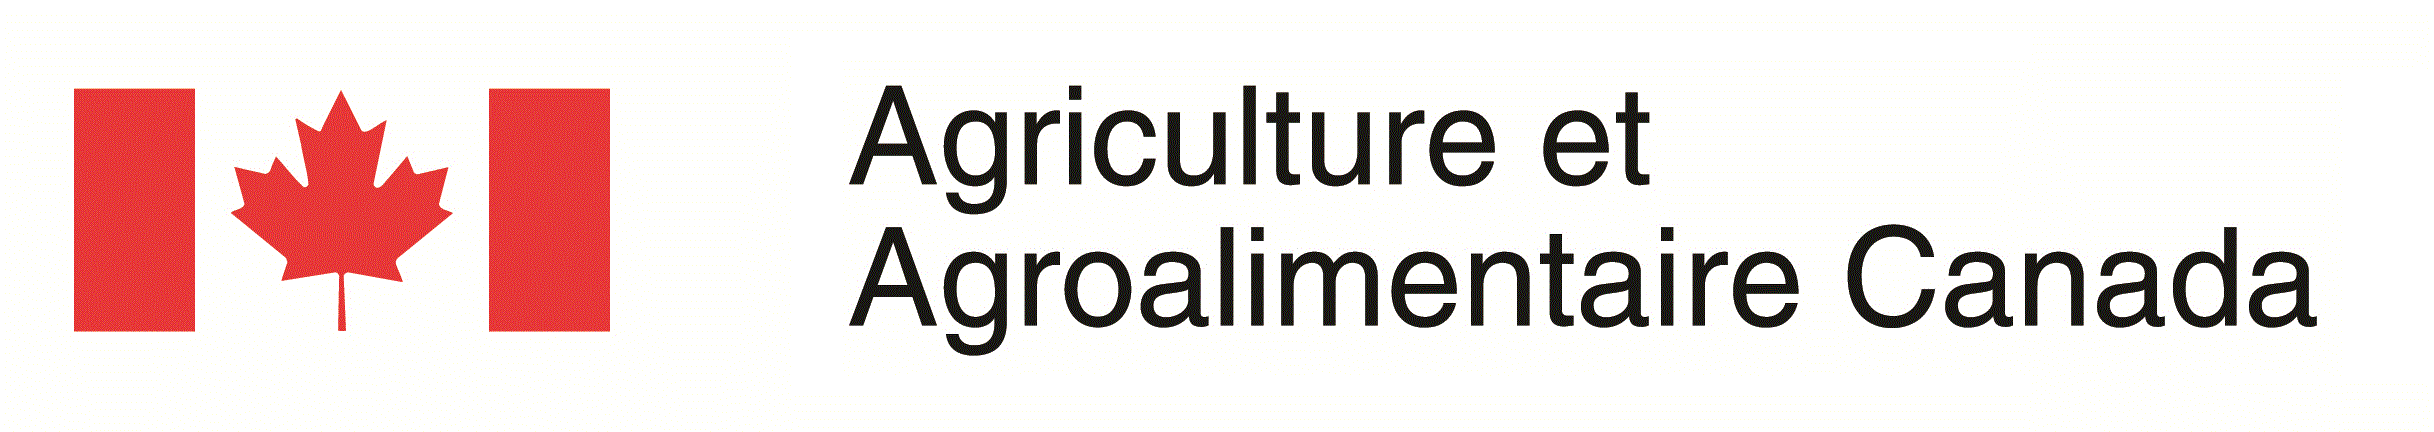 Agriculture et agroalimentaire Canada